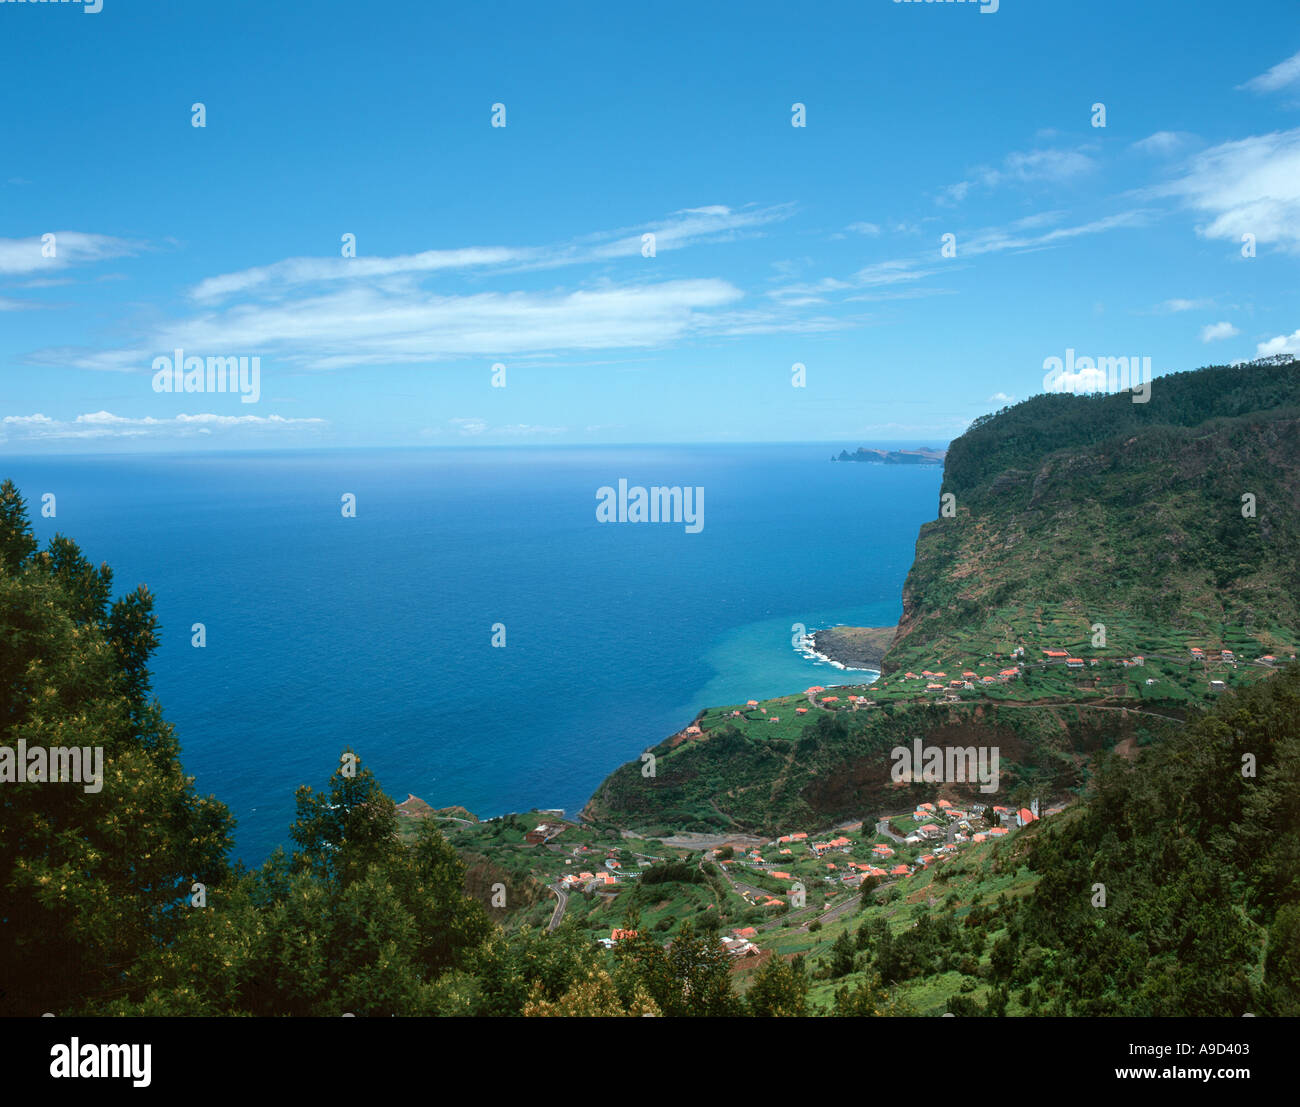 View over the northern coast village of Faixal, Madeira, Portugal Stock Photo